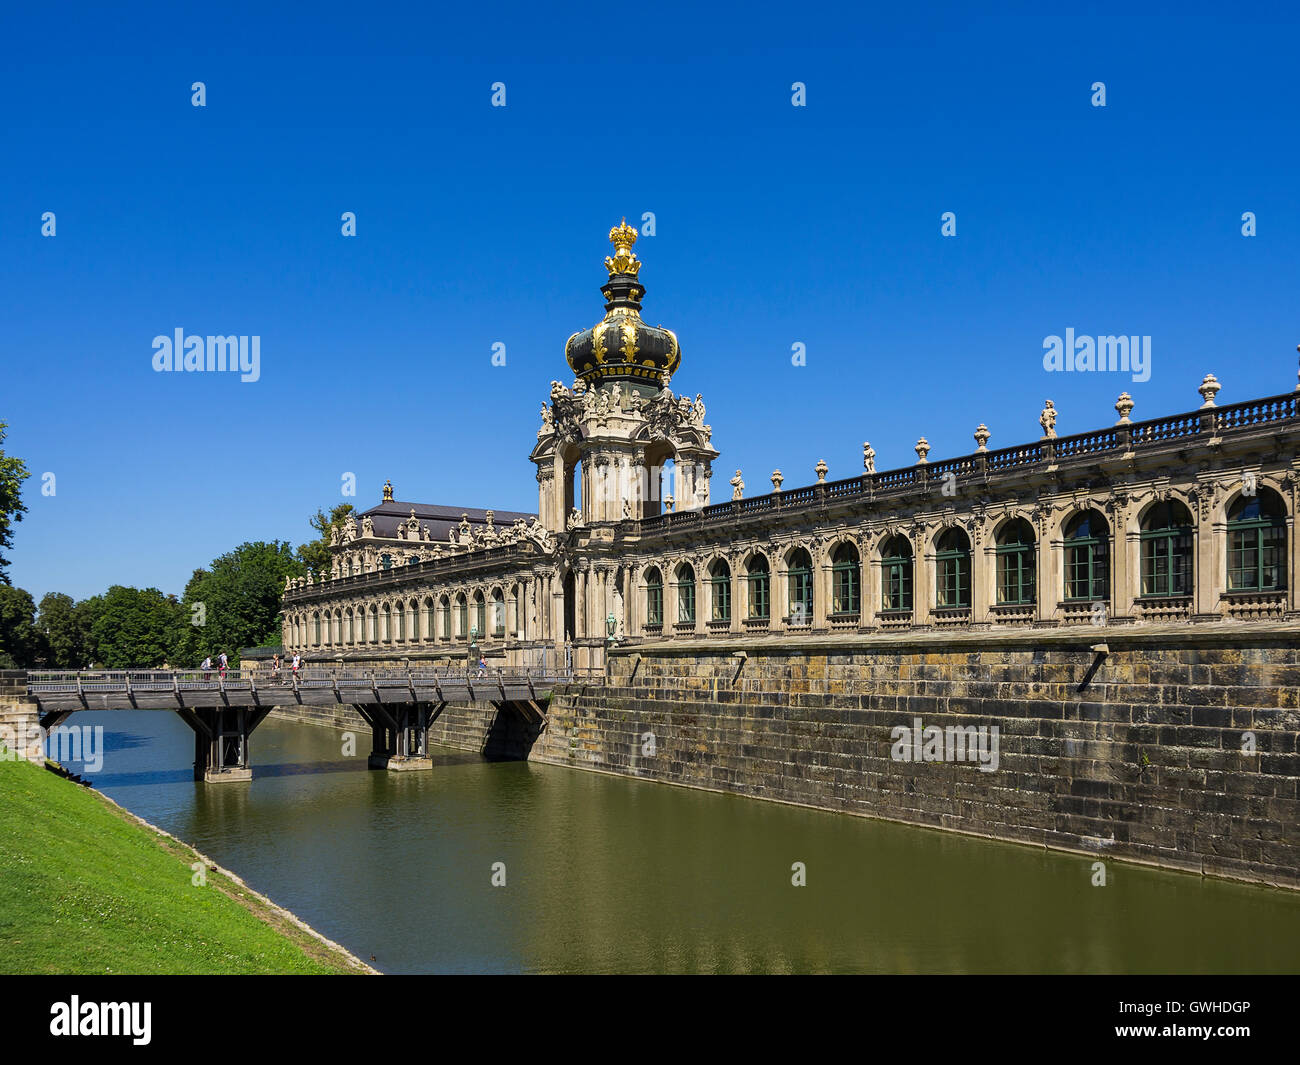 The Zwinger Palace in the city of Dresden, Saxony, Germany. Stock Photo